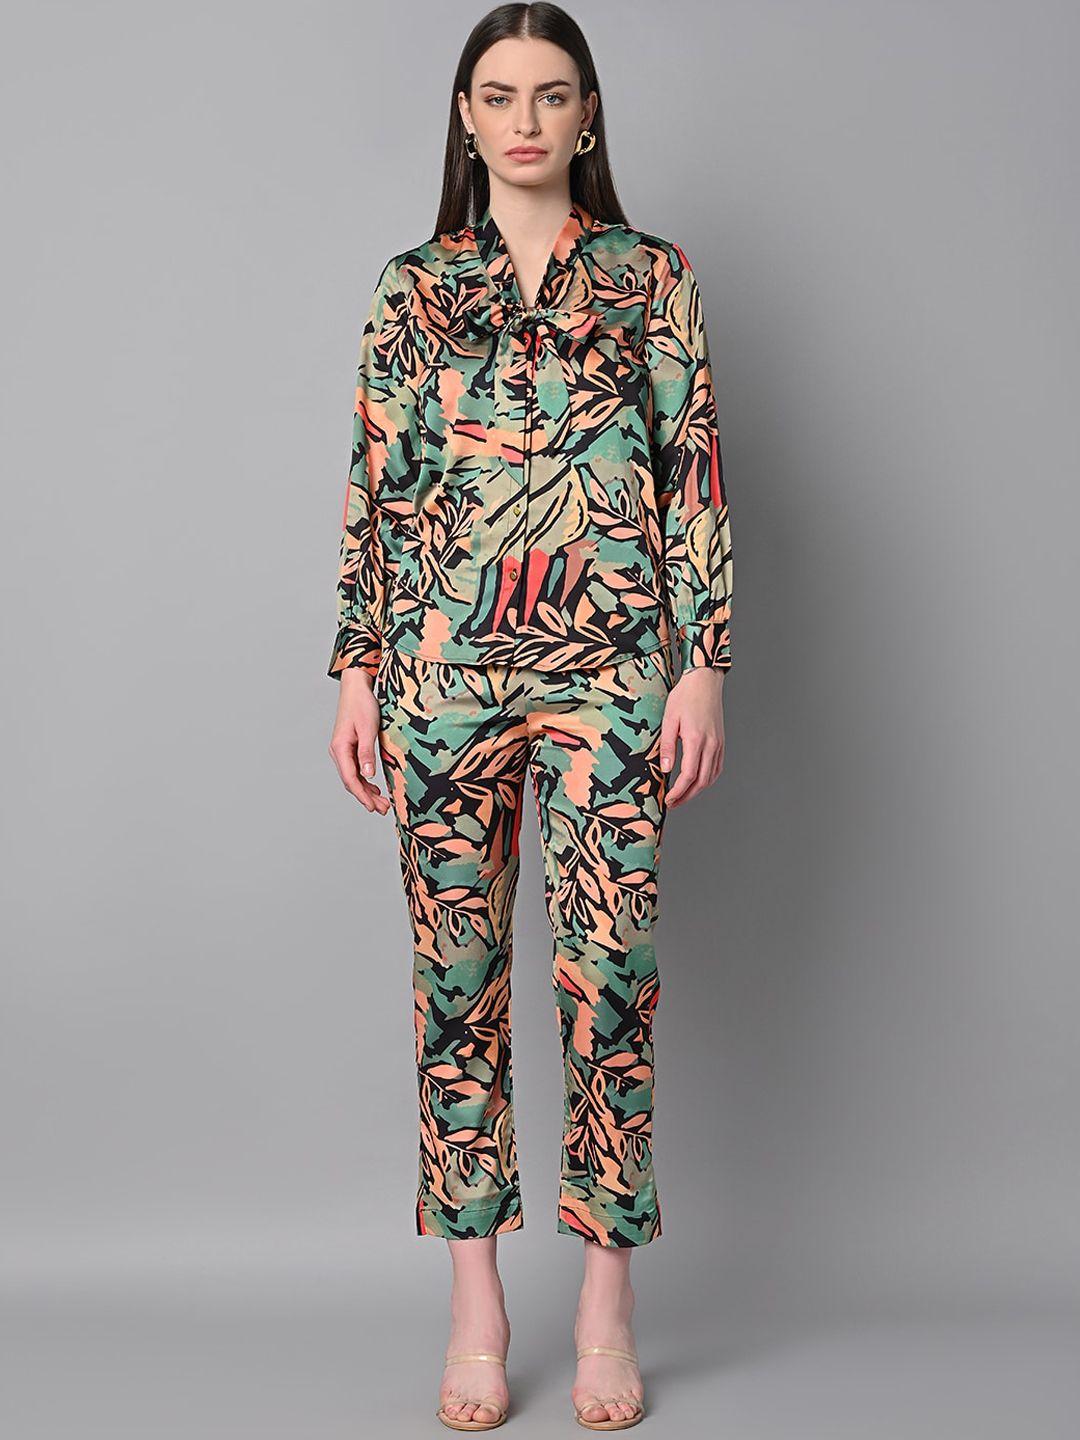 justin whyte abstract printed top & trousers